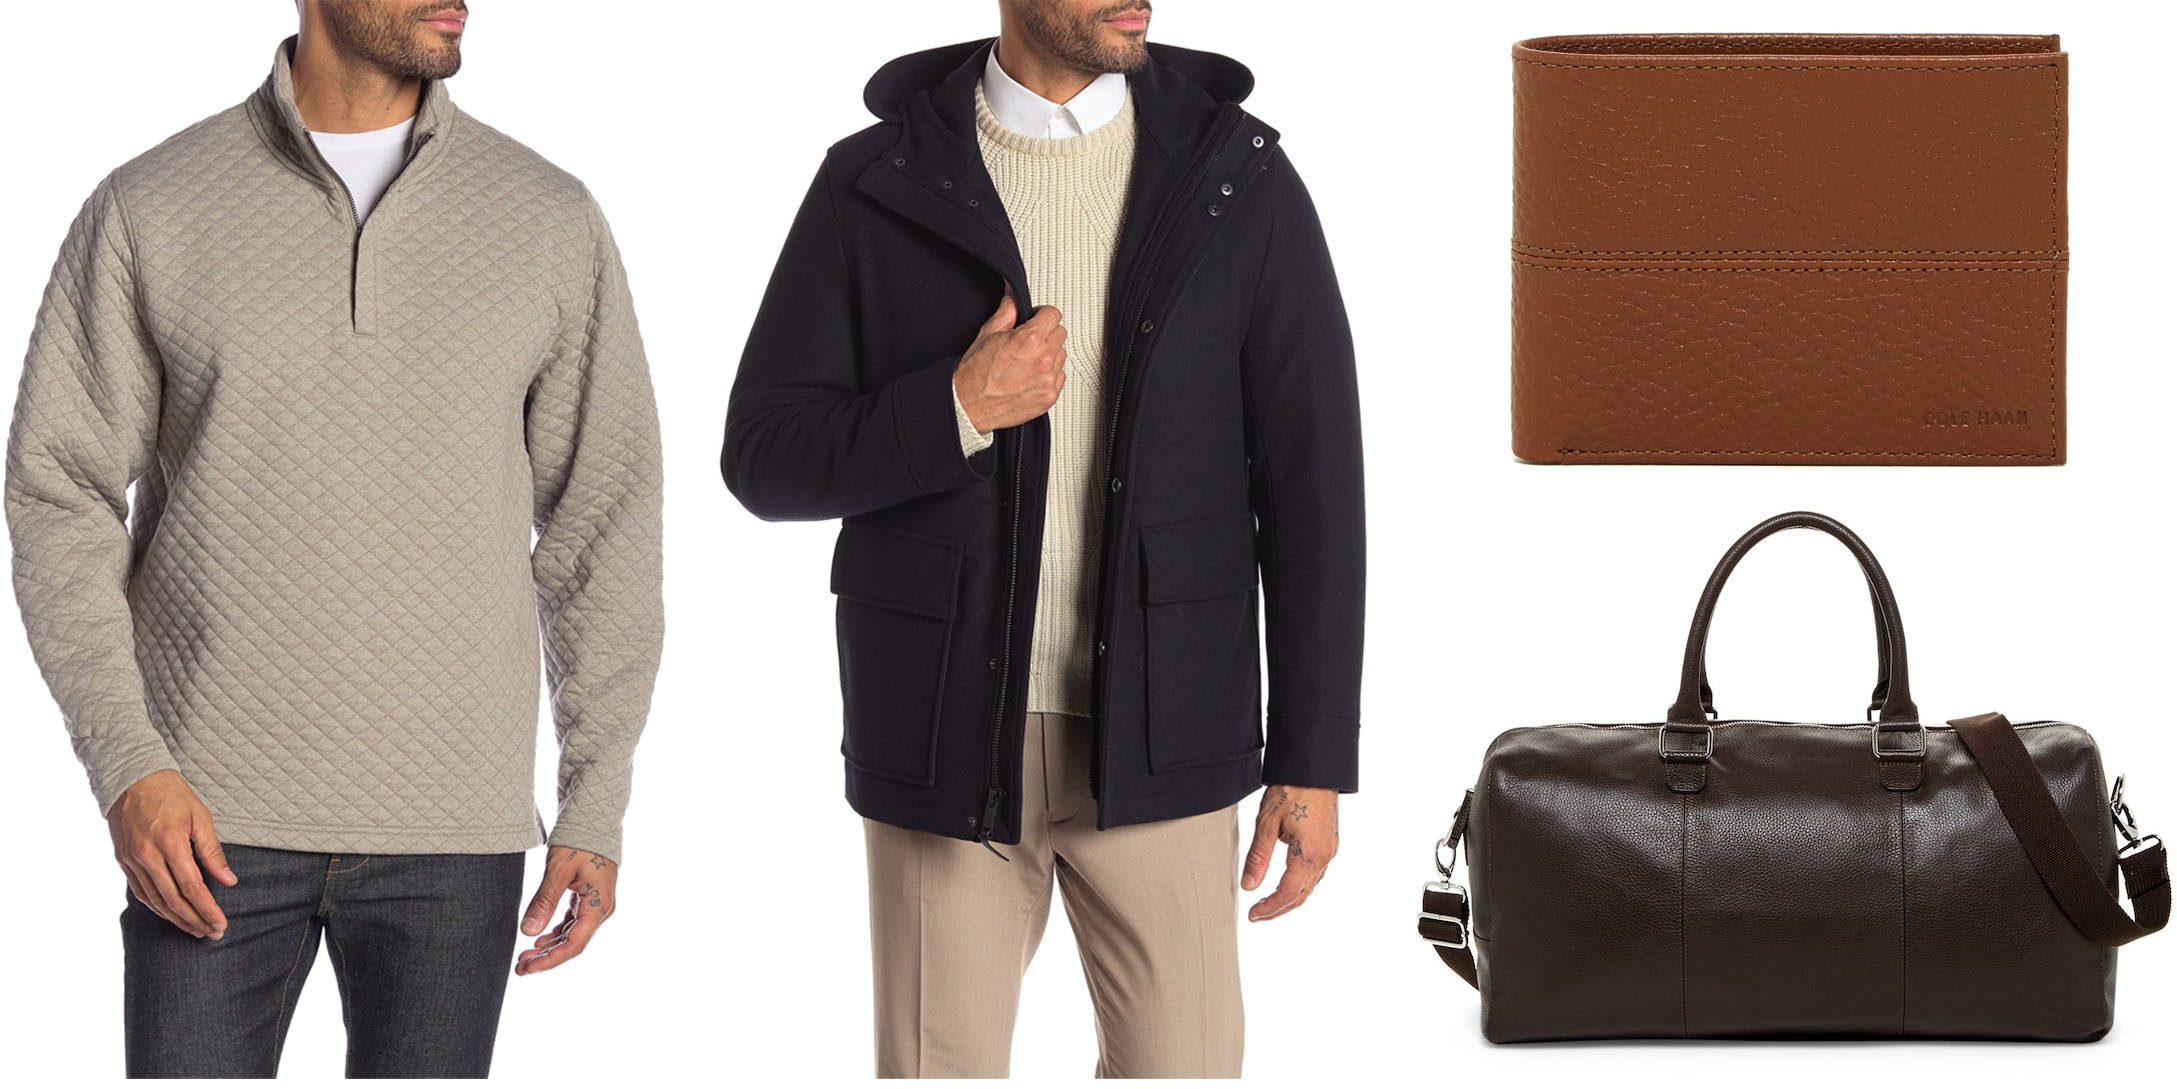 Cole Haan wallets, apparel, backpacks and more from $20 during ...